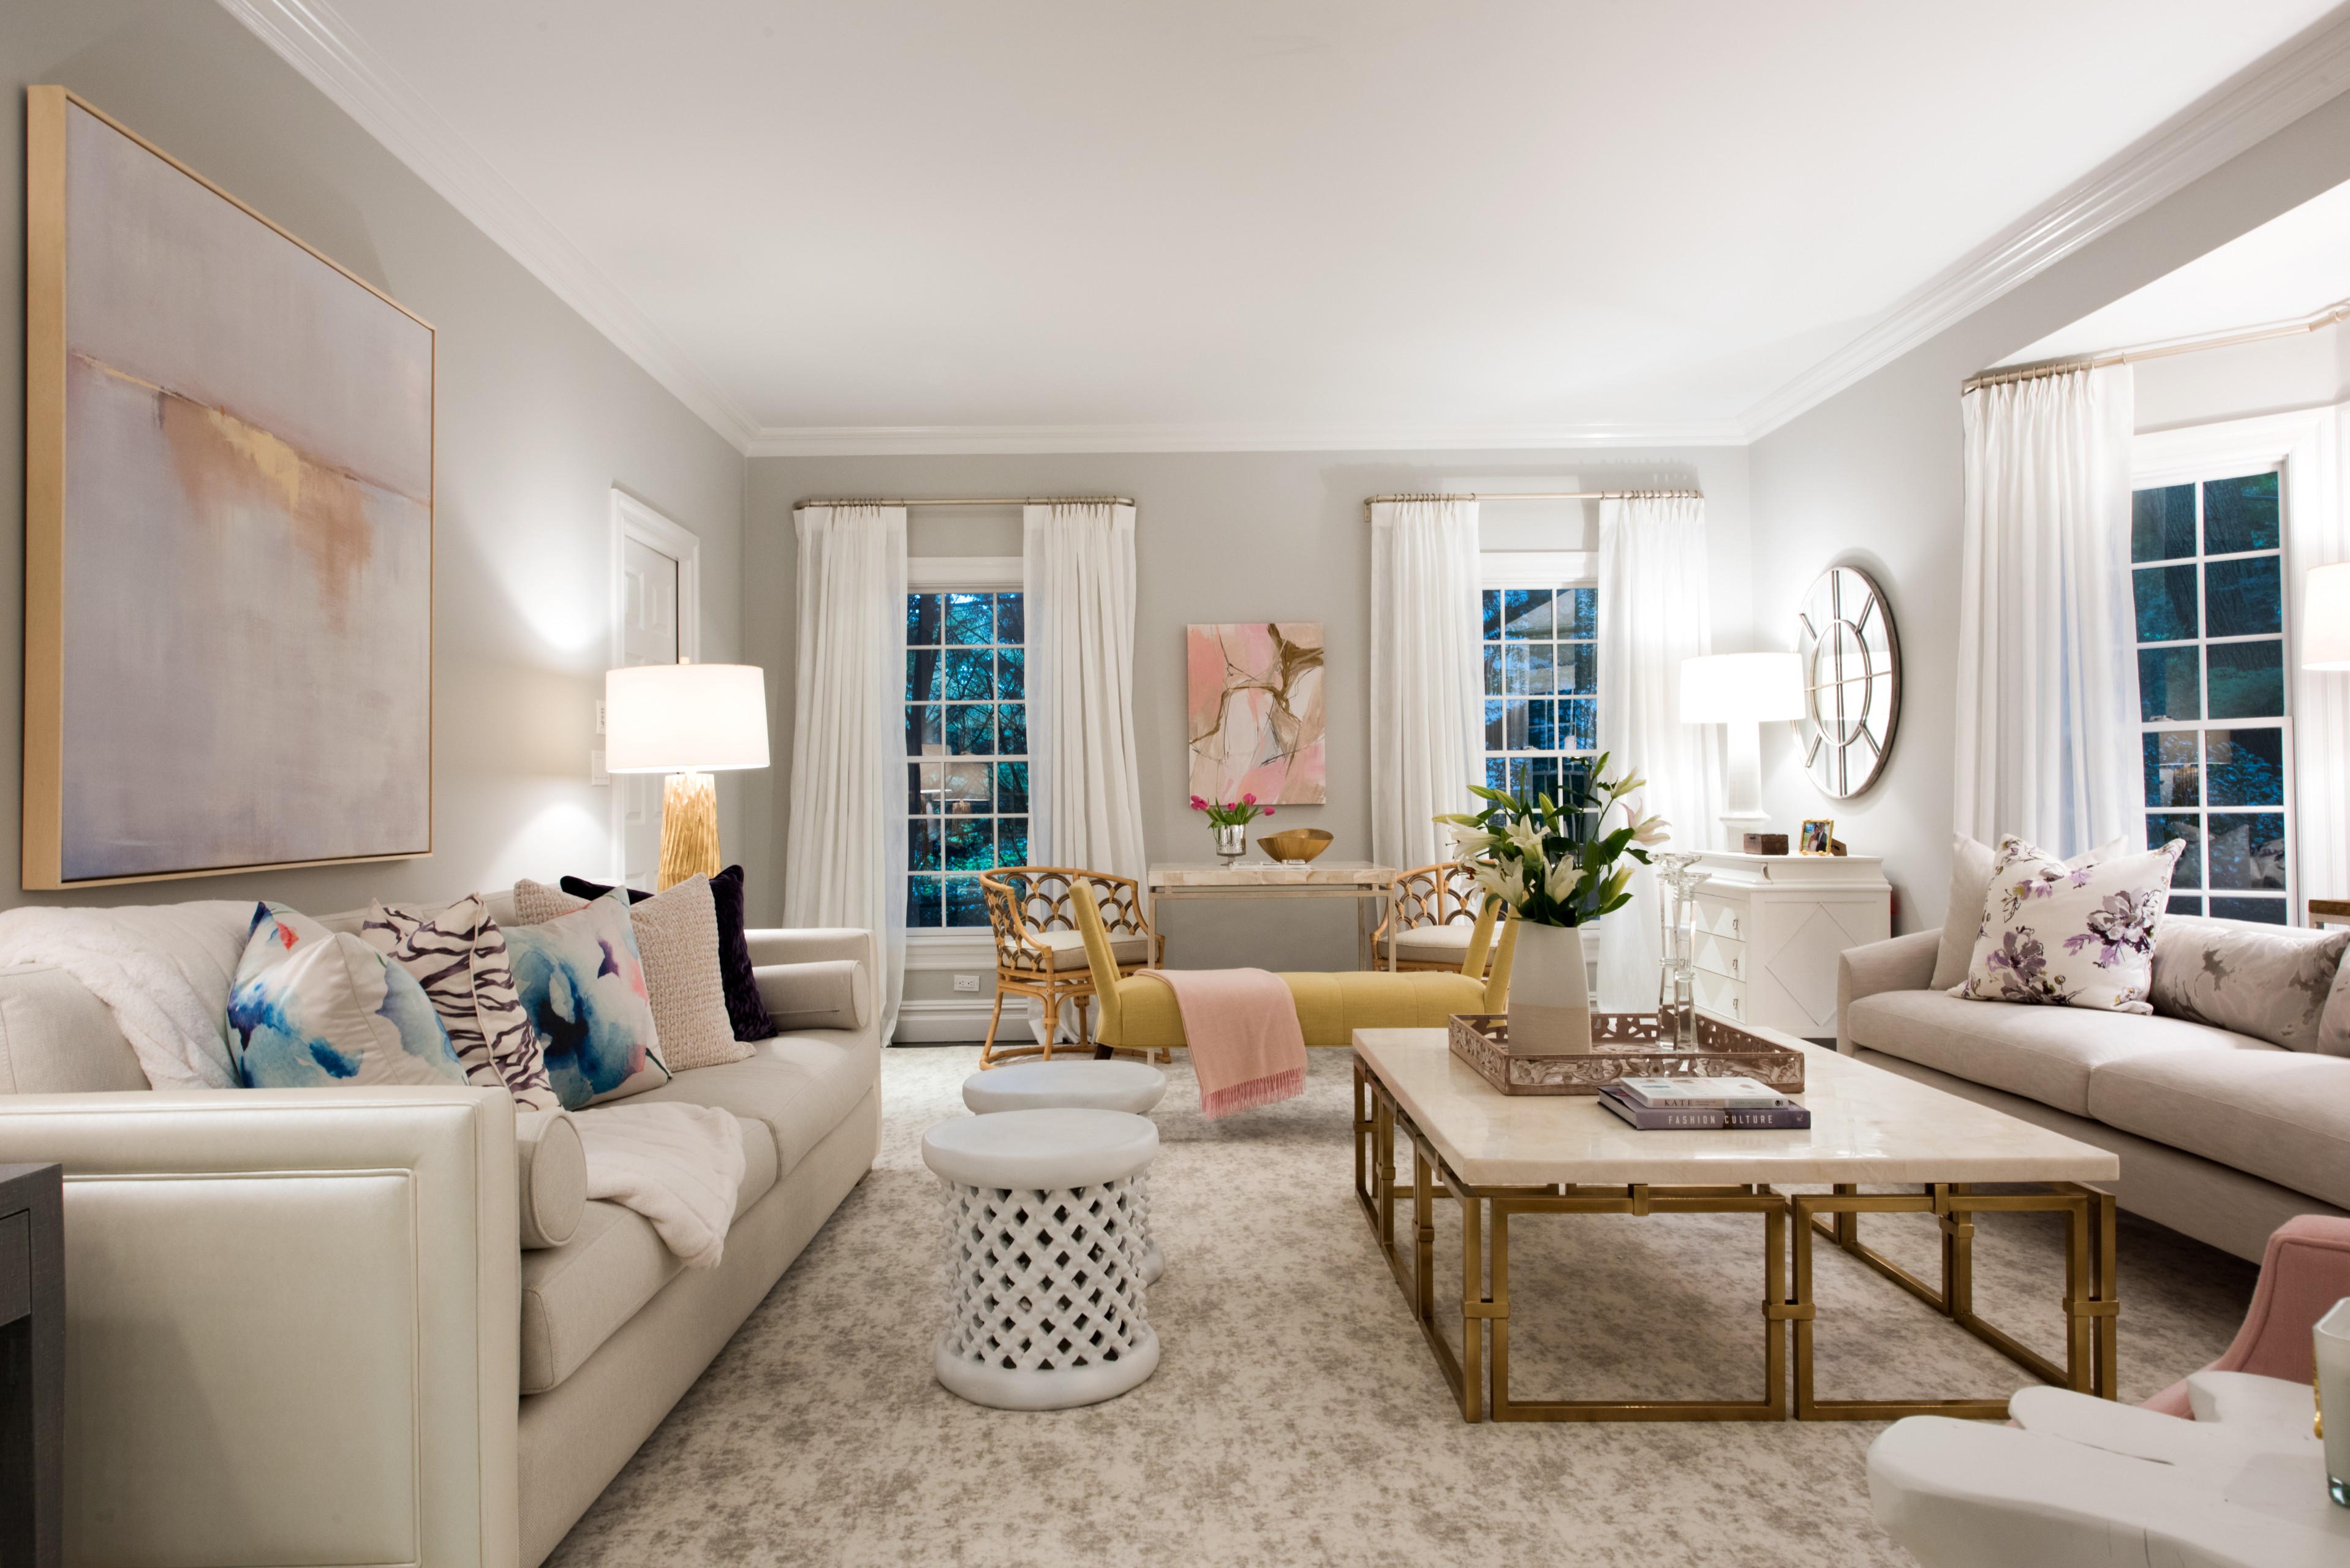 75 Beautiful Living Room Carpet Pictures & Ideas | Houzz